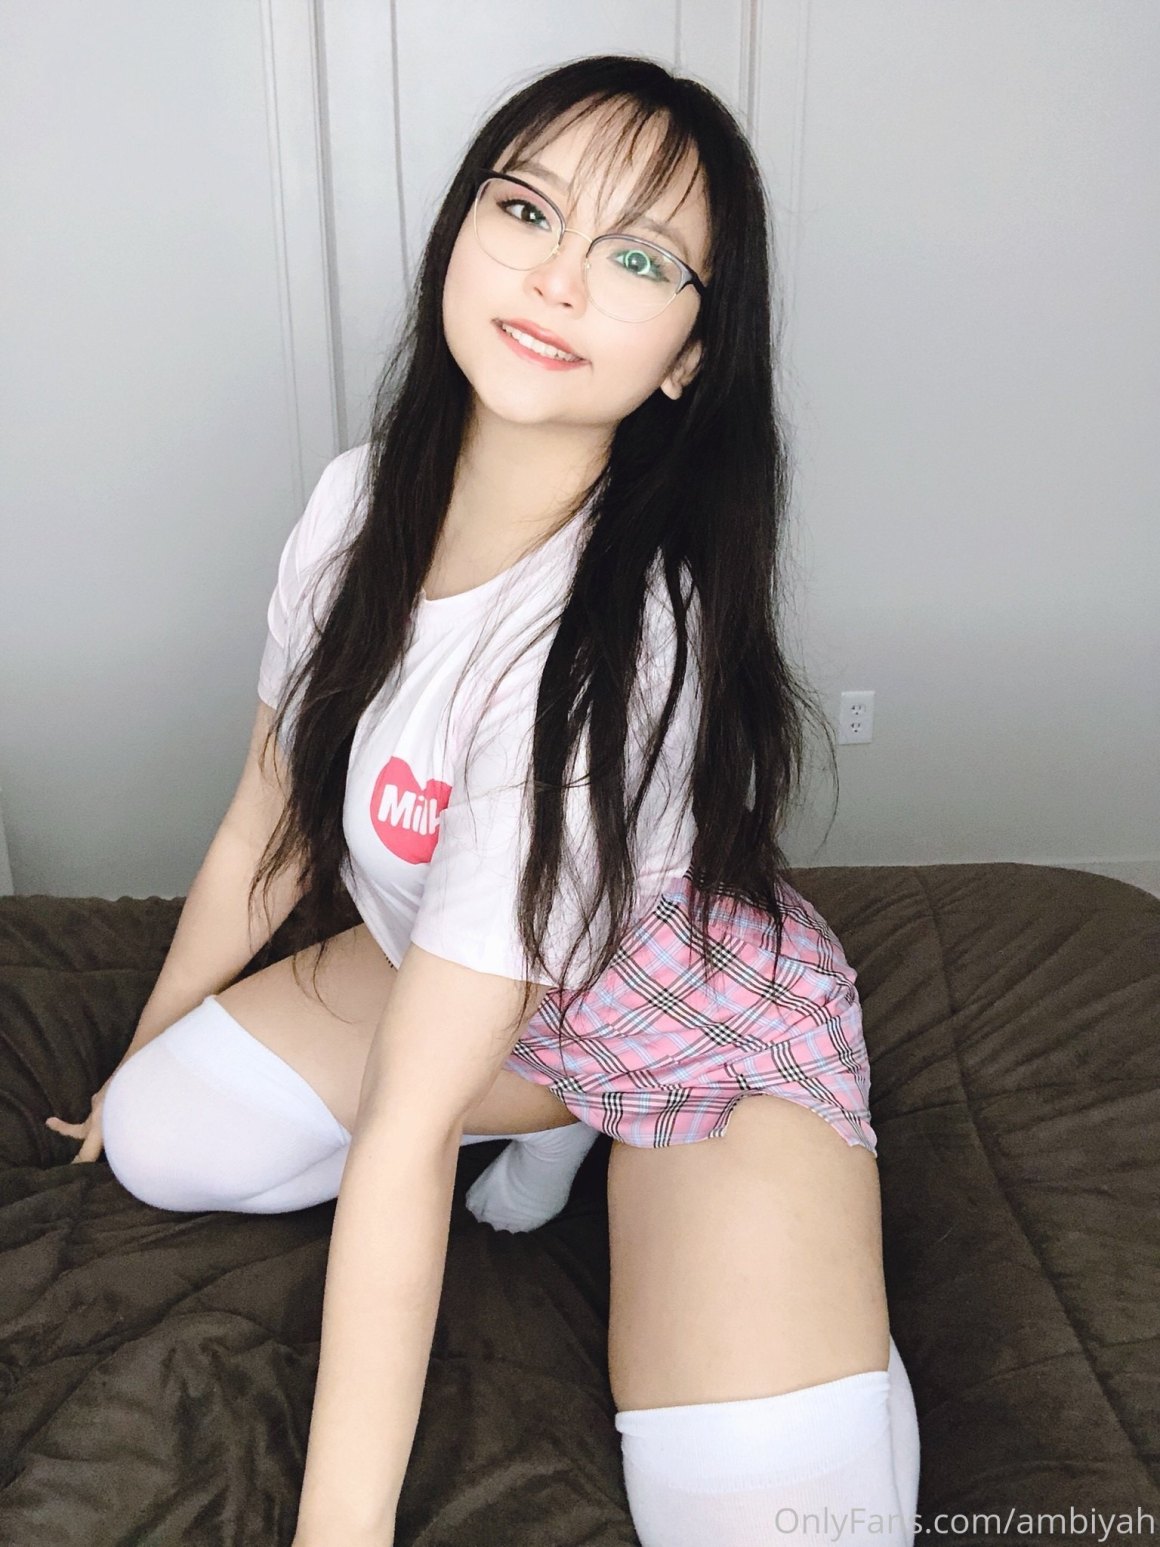 AsianOnlyfans 72 001 459 20220225